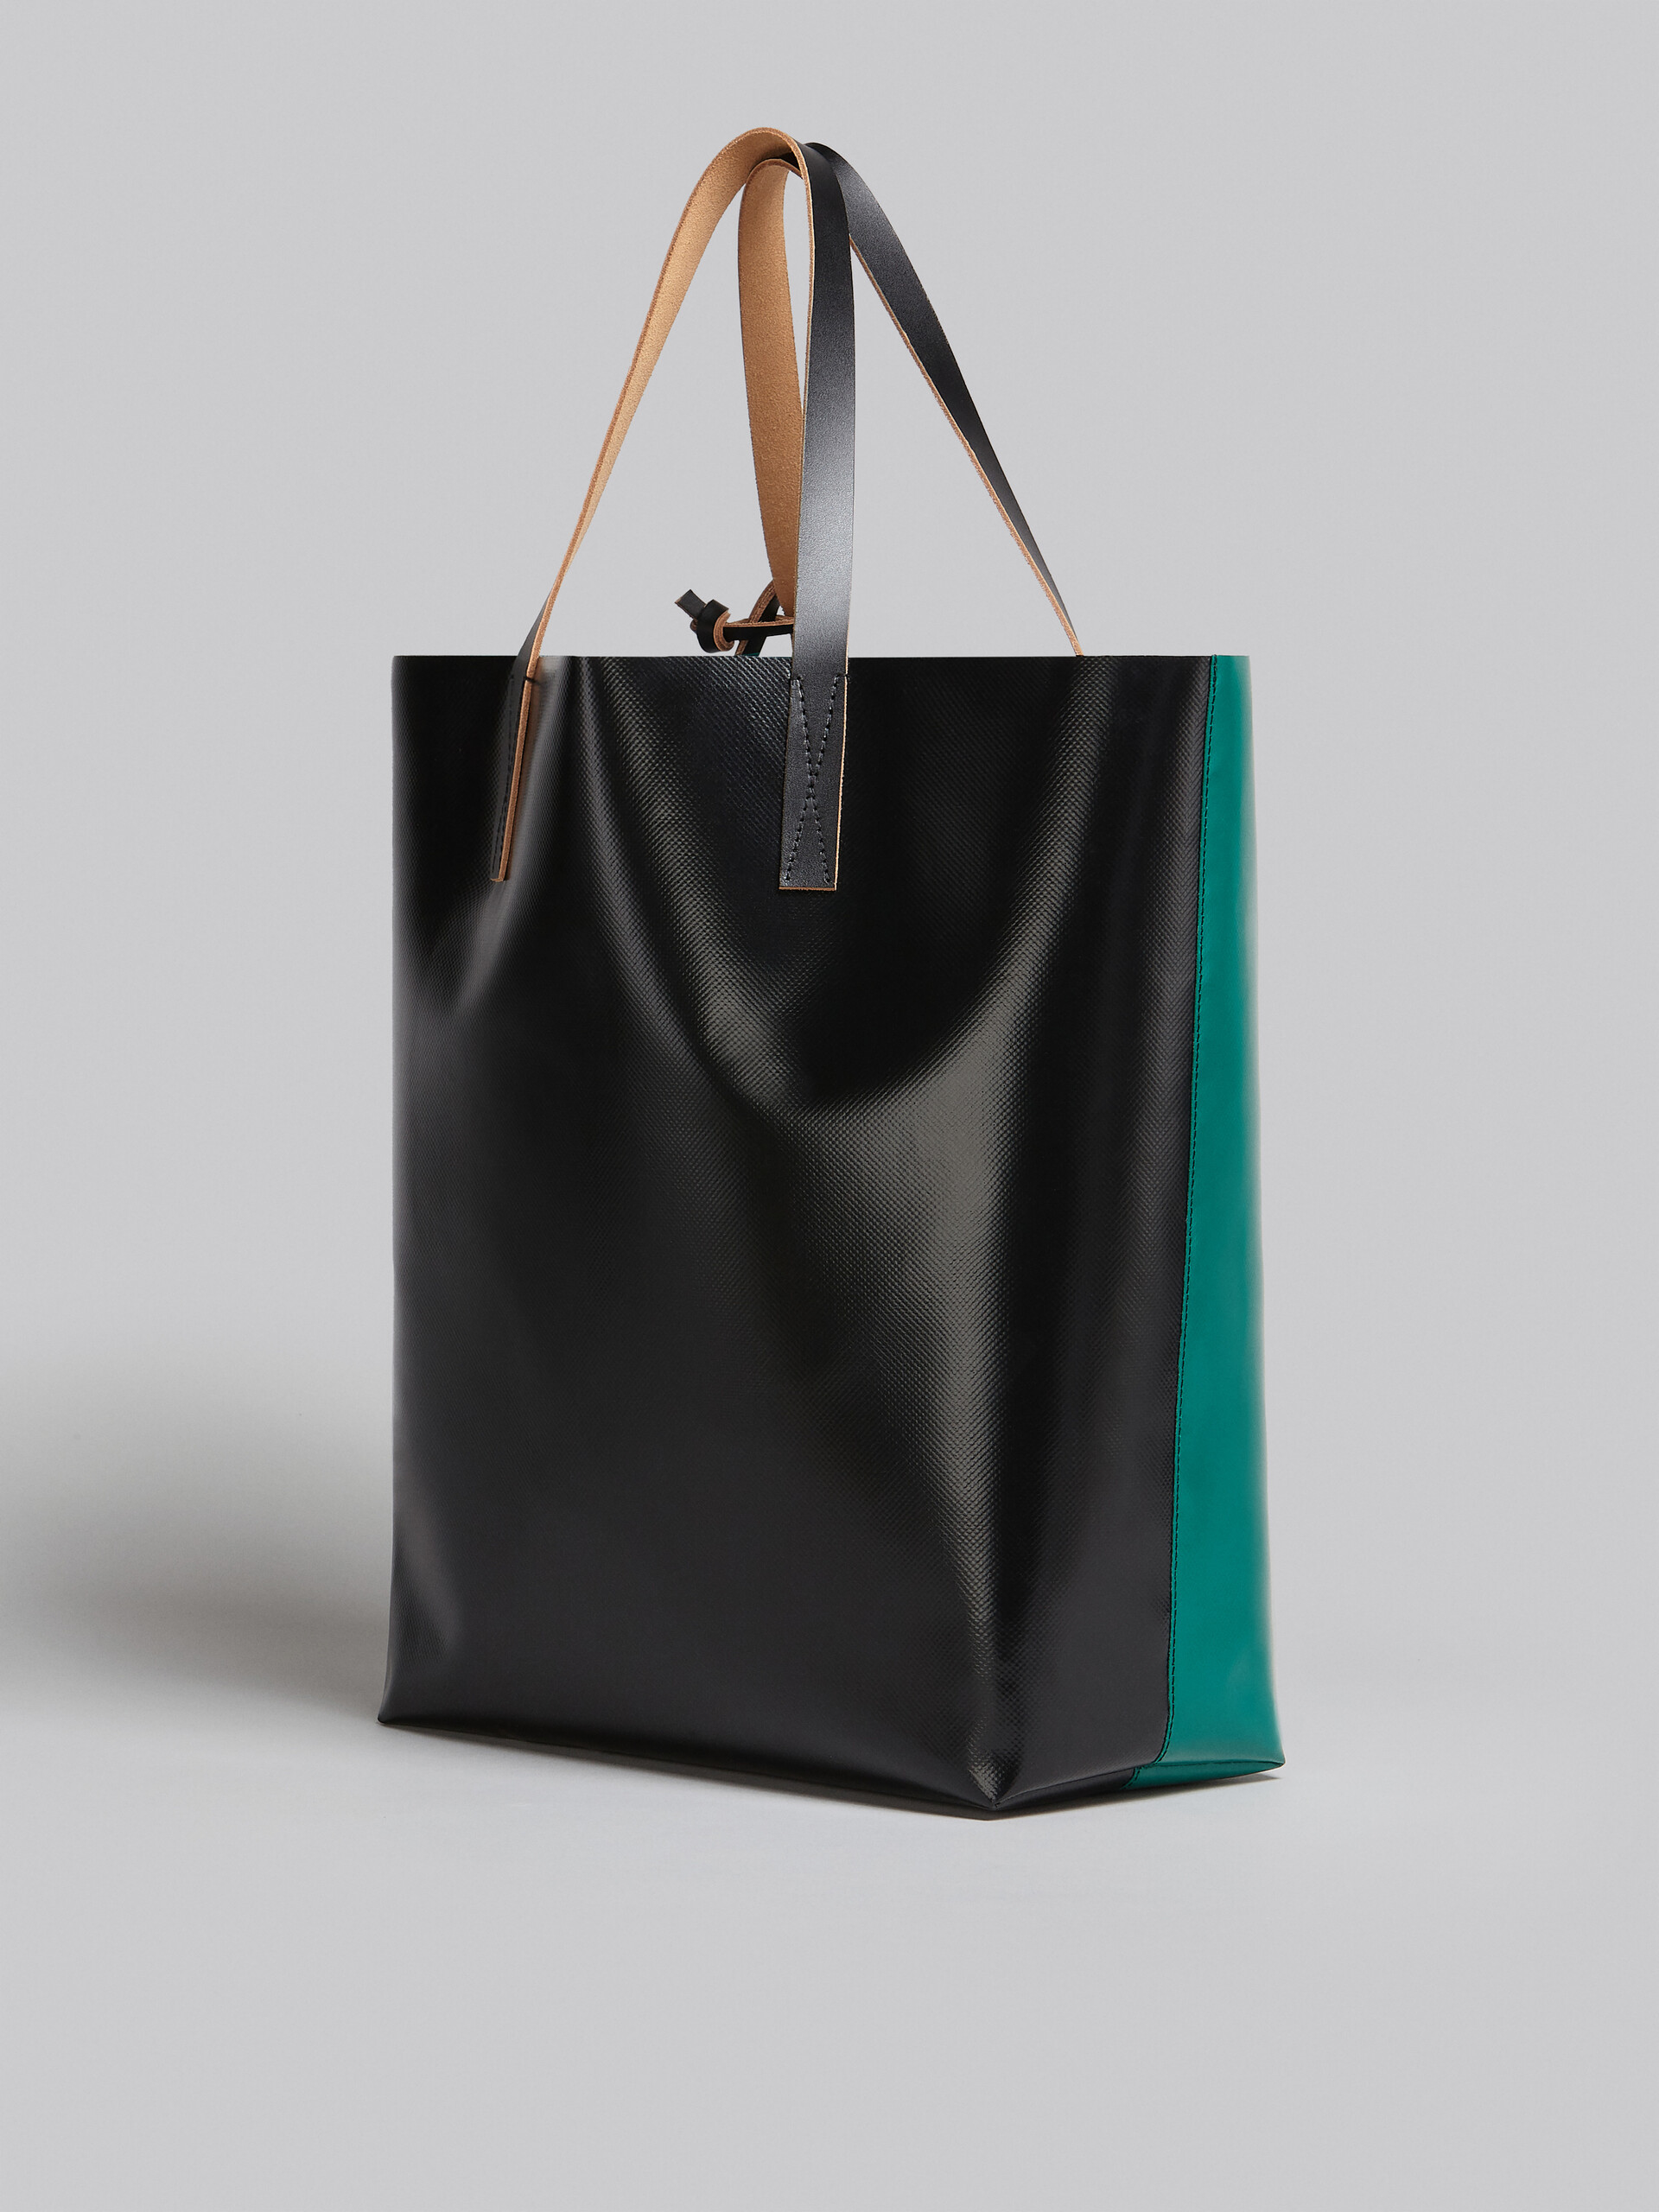 Tribeca Shopping Bag in white and black - Shopping Bags - Image 6